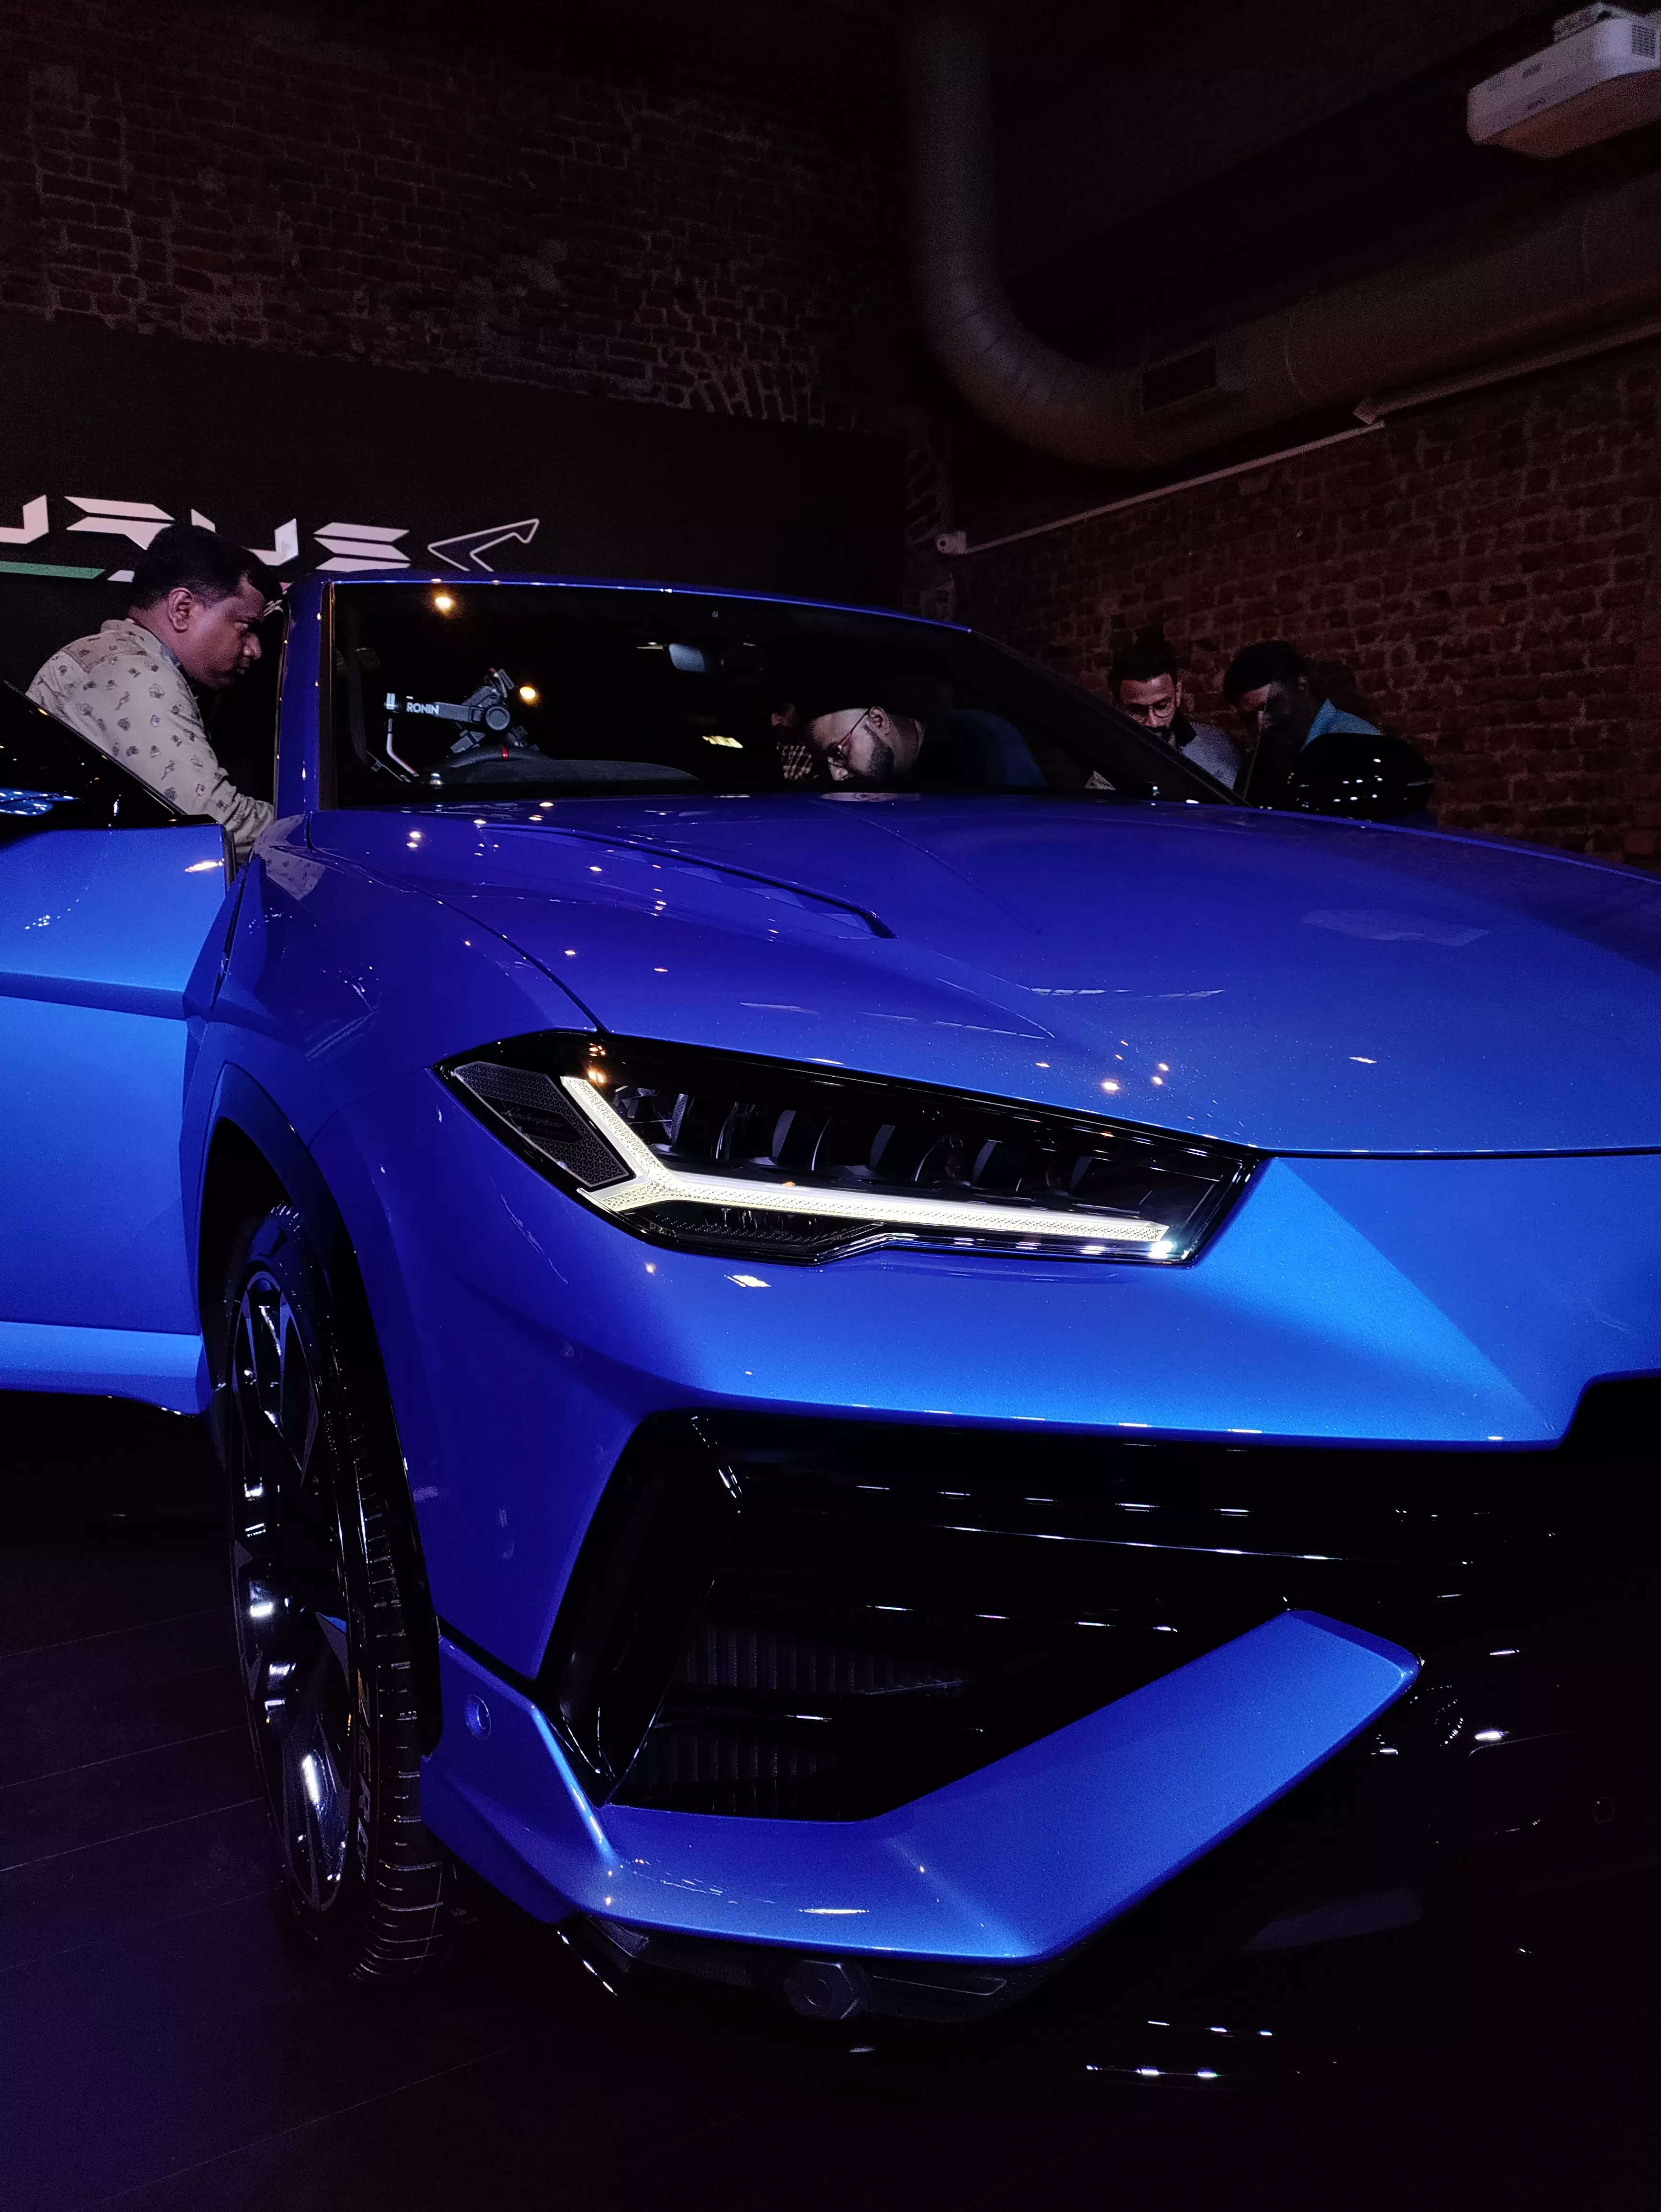 Lamborghini launches Urus S in India at Rs 4.18 crore ex-showroom price;  top speed, acceleration, other features revealed